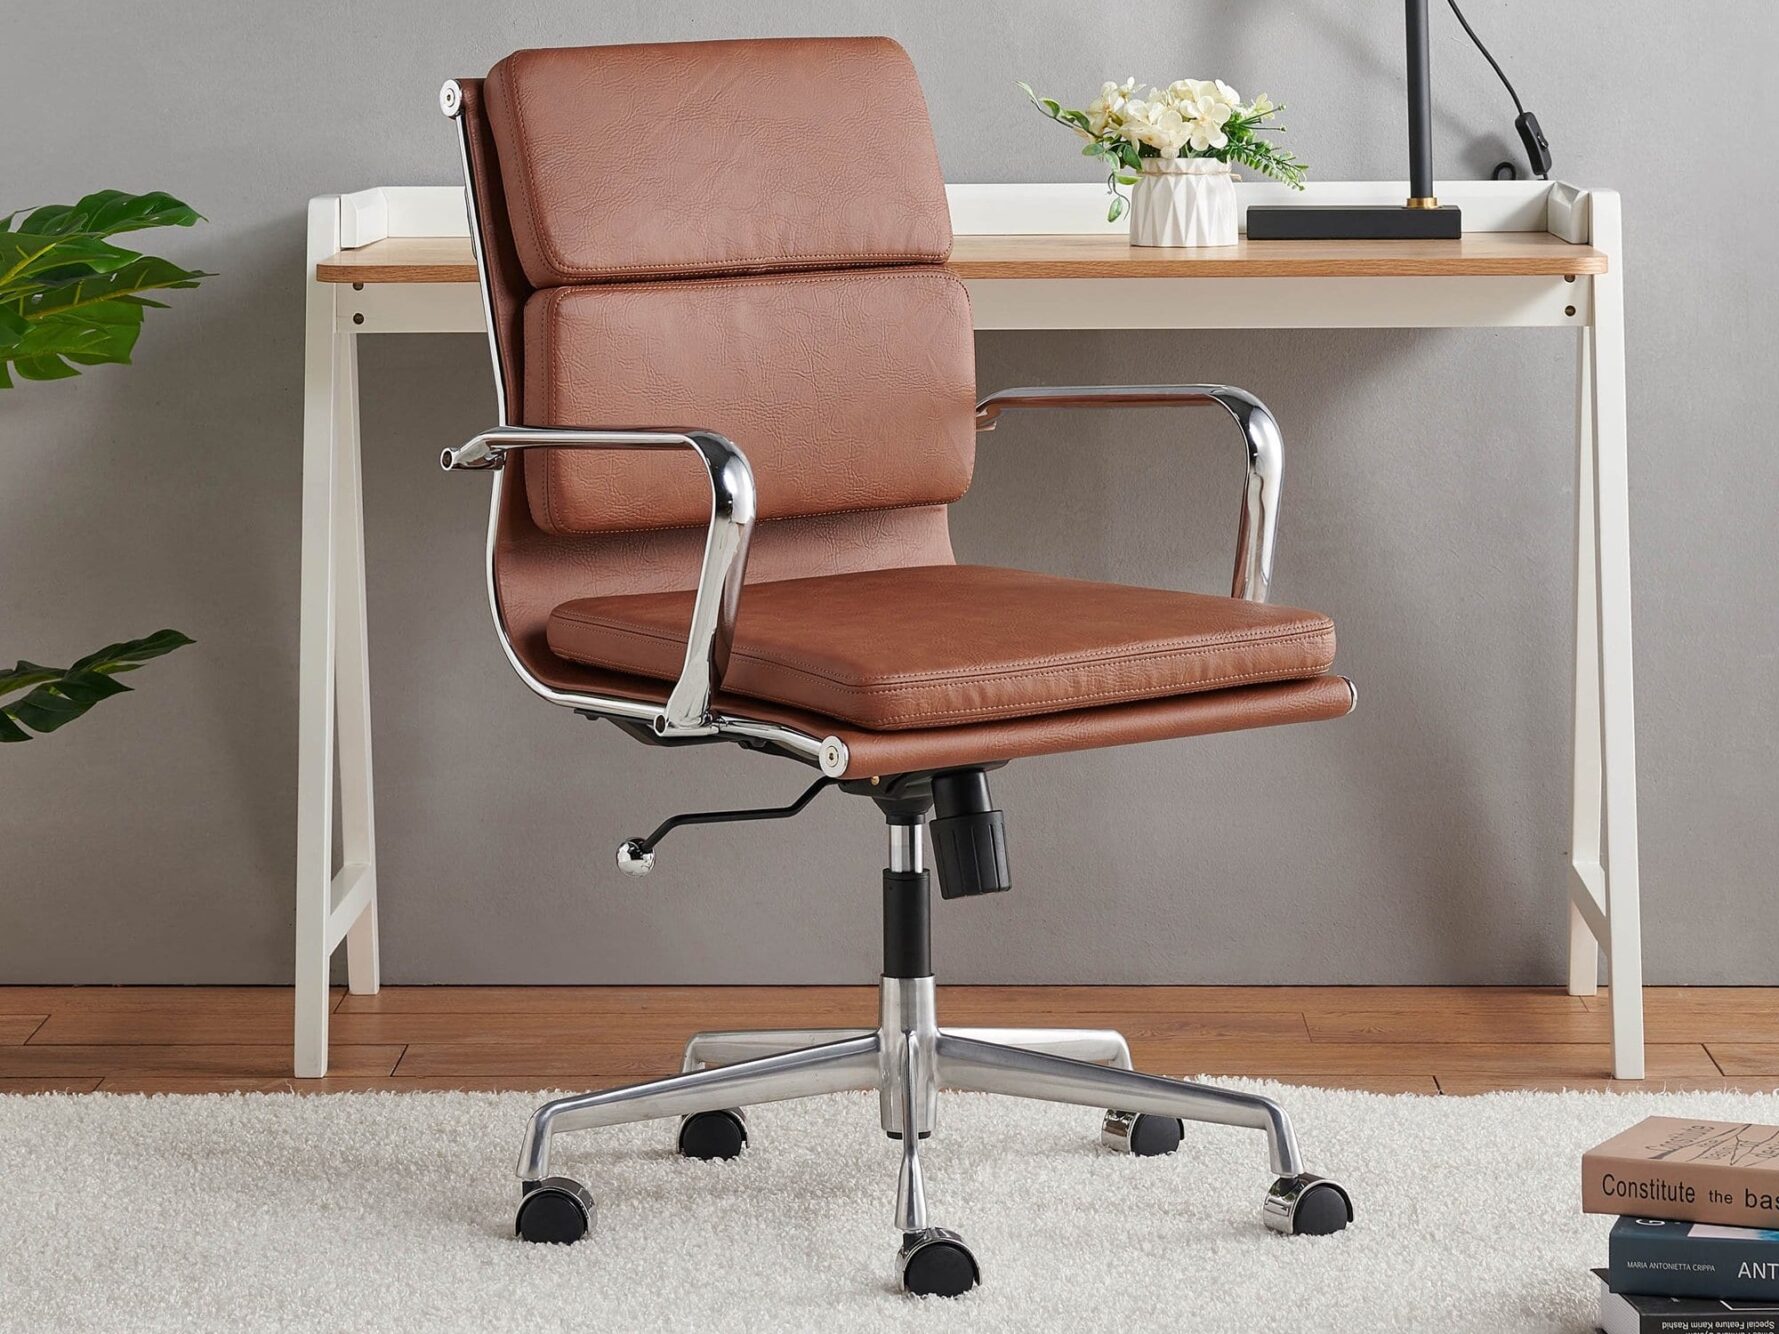 Best Rotation Chair 2023: Experience Comfort and Mobility